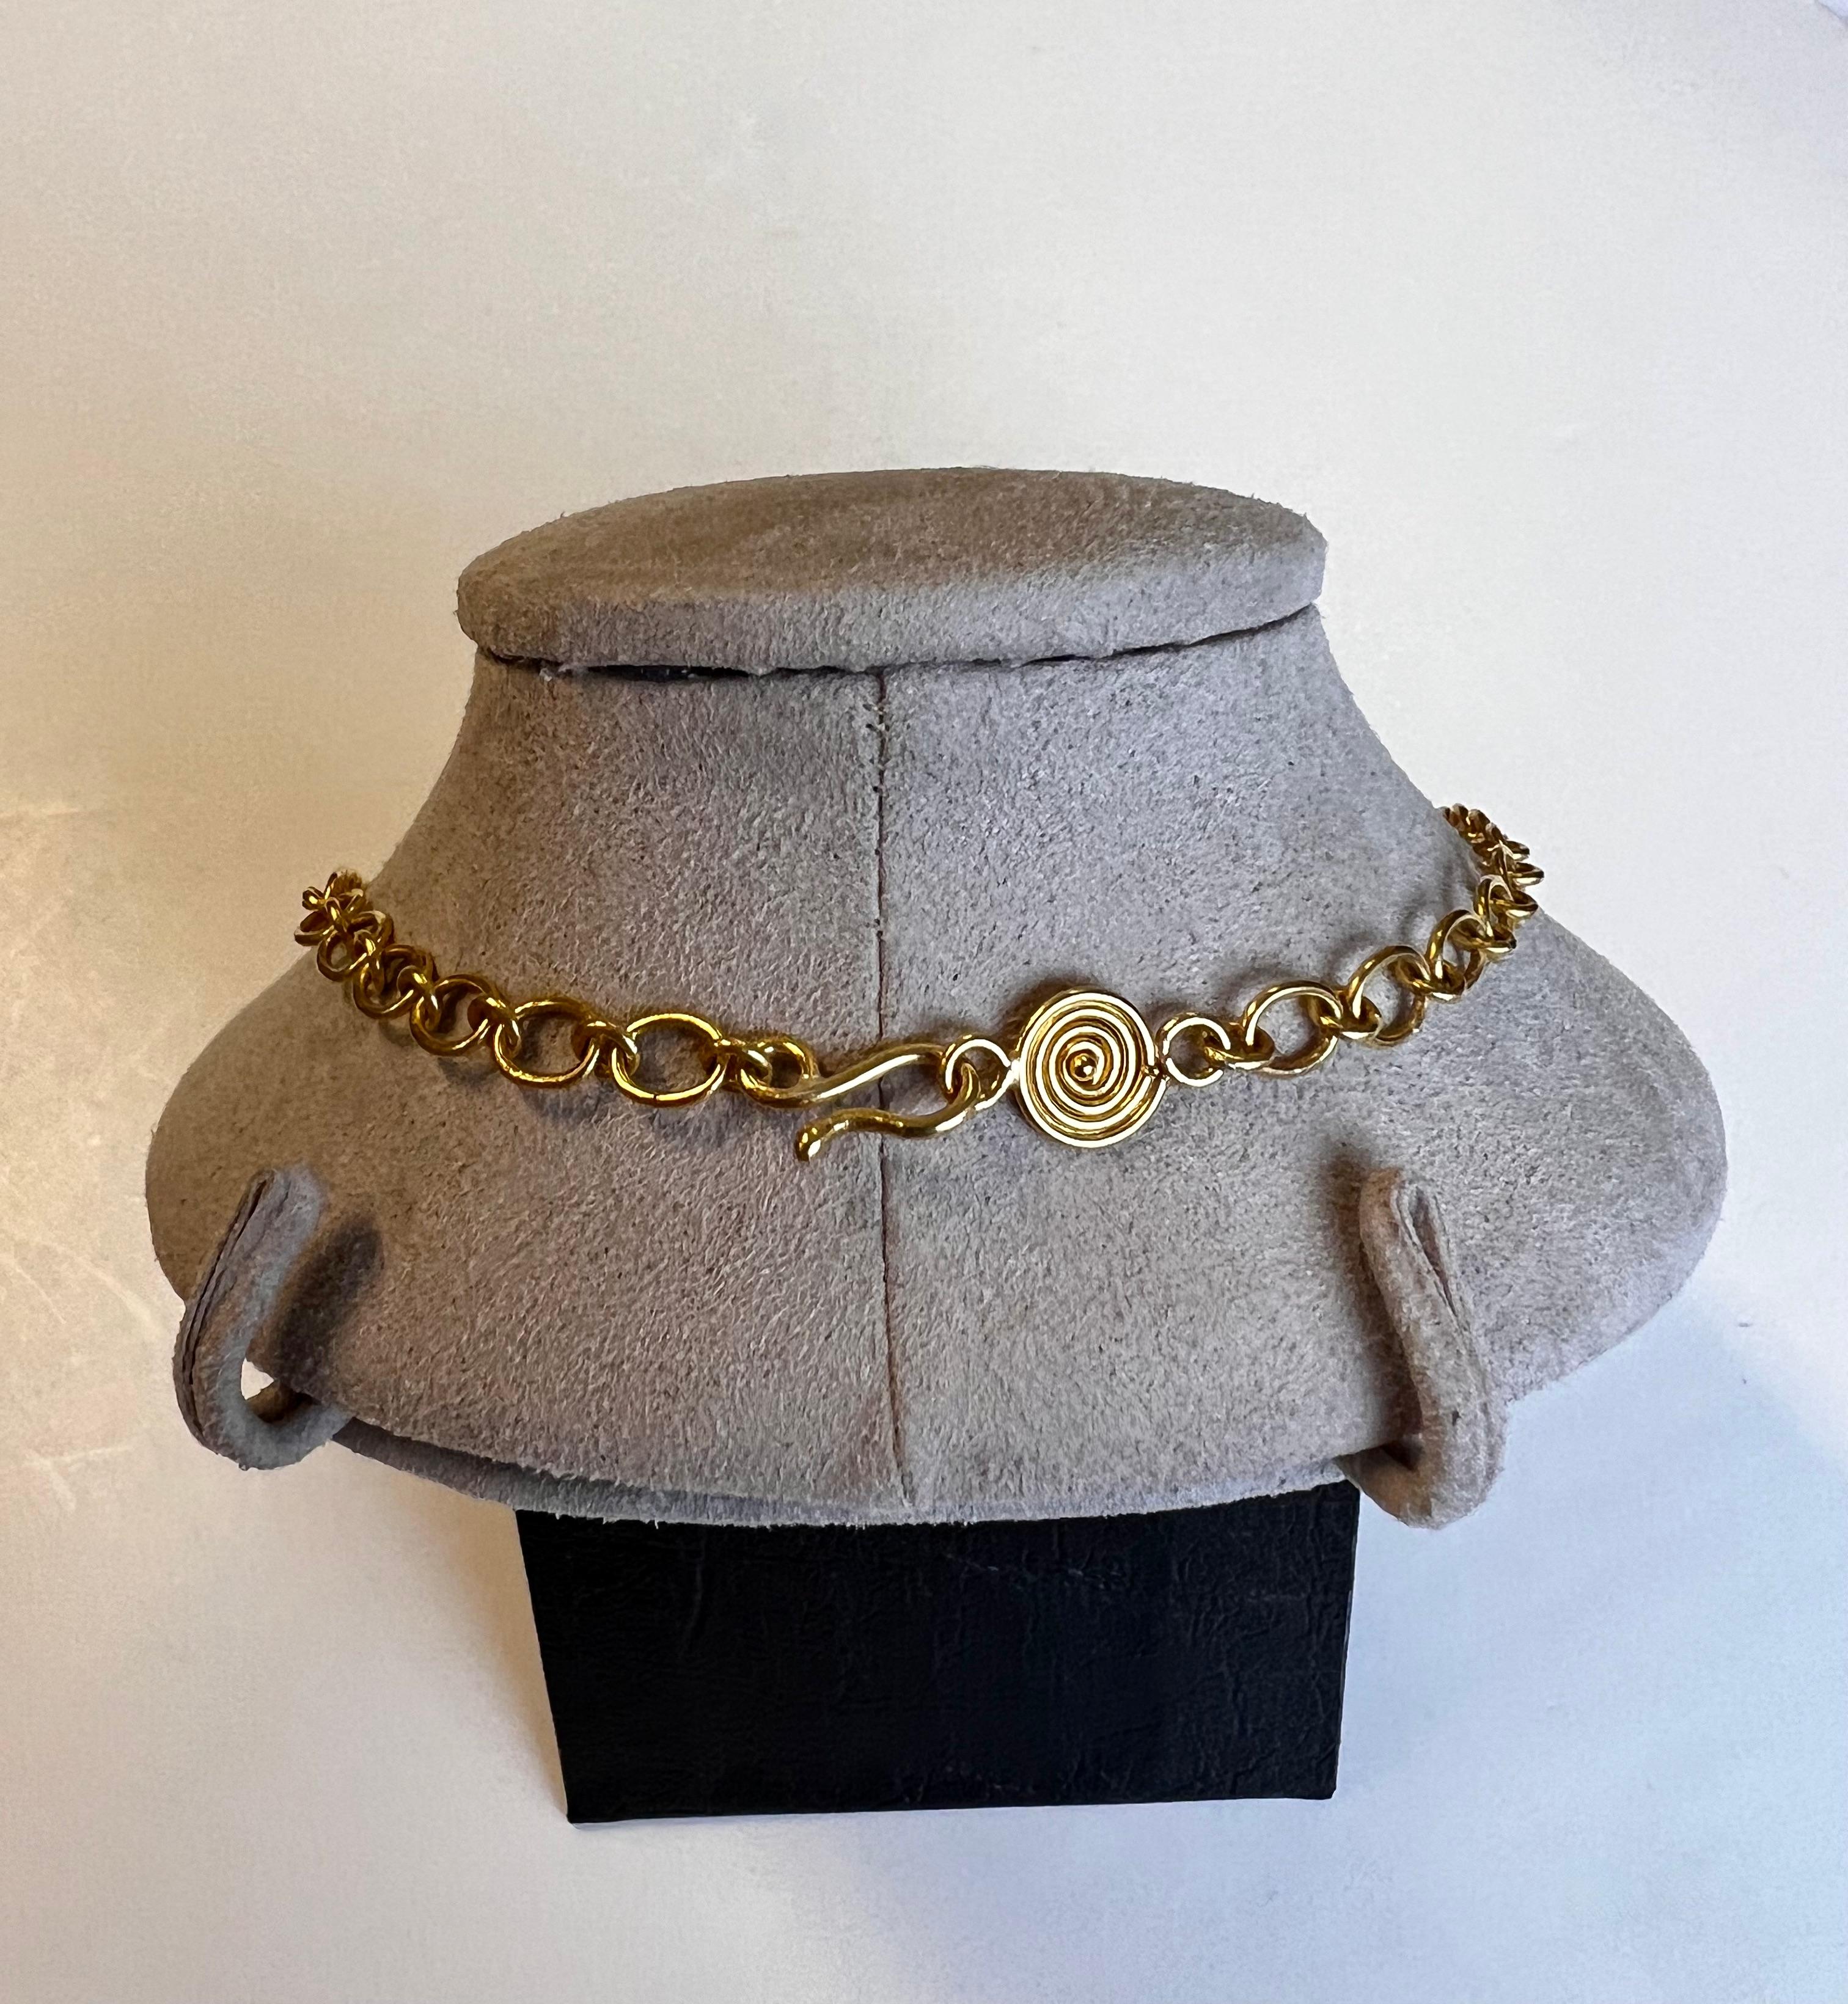 22 inch hand crafted gold chain in Medieval/Renaissance style.  
